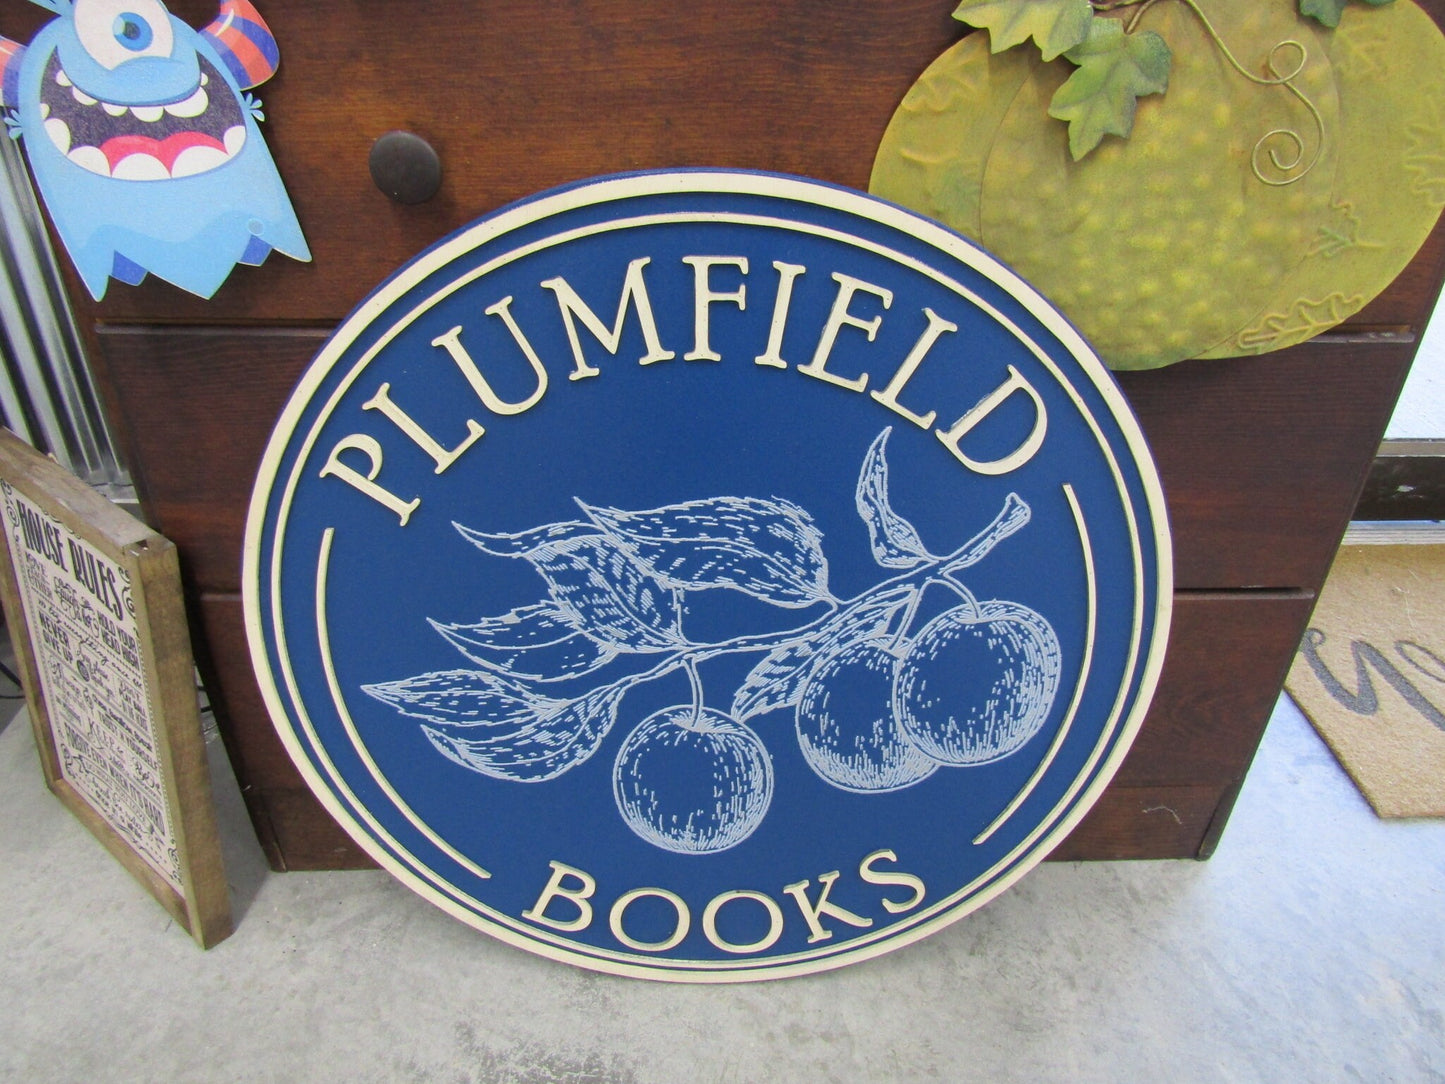 Custom Wooden Sign Plum Book Store Entrance Sign Your Logo Personalized Hanging Sign Raised Letters Round Printed Image Fruit Blue Handmade